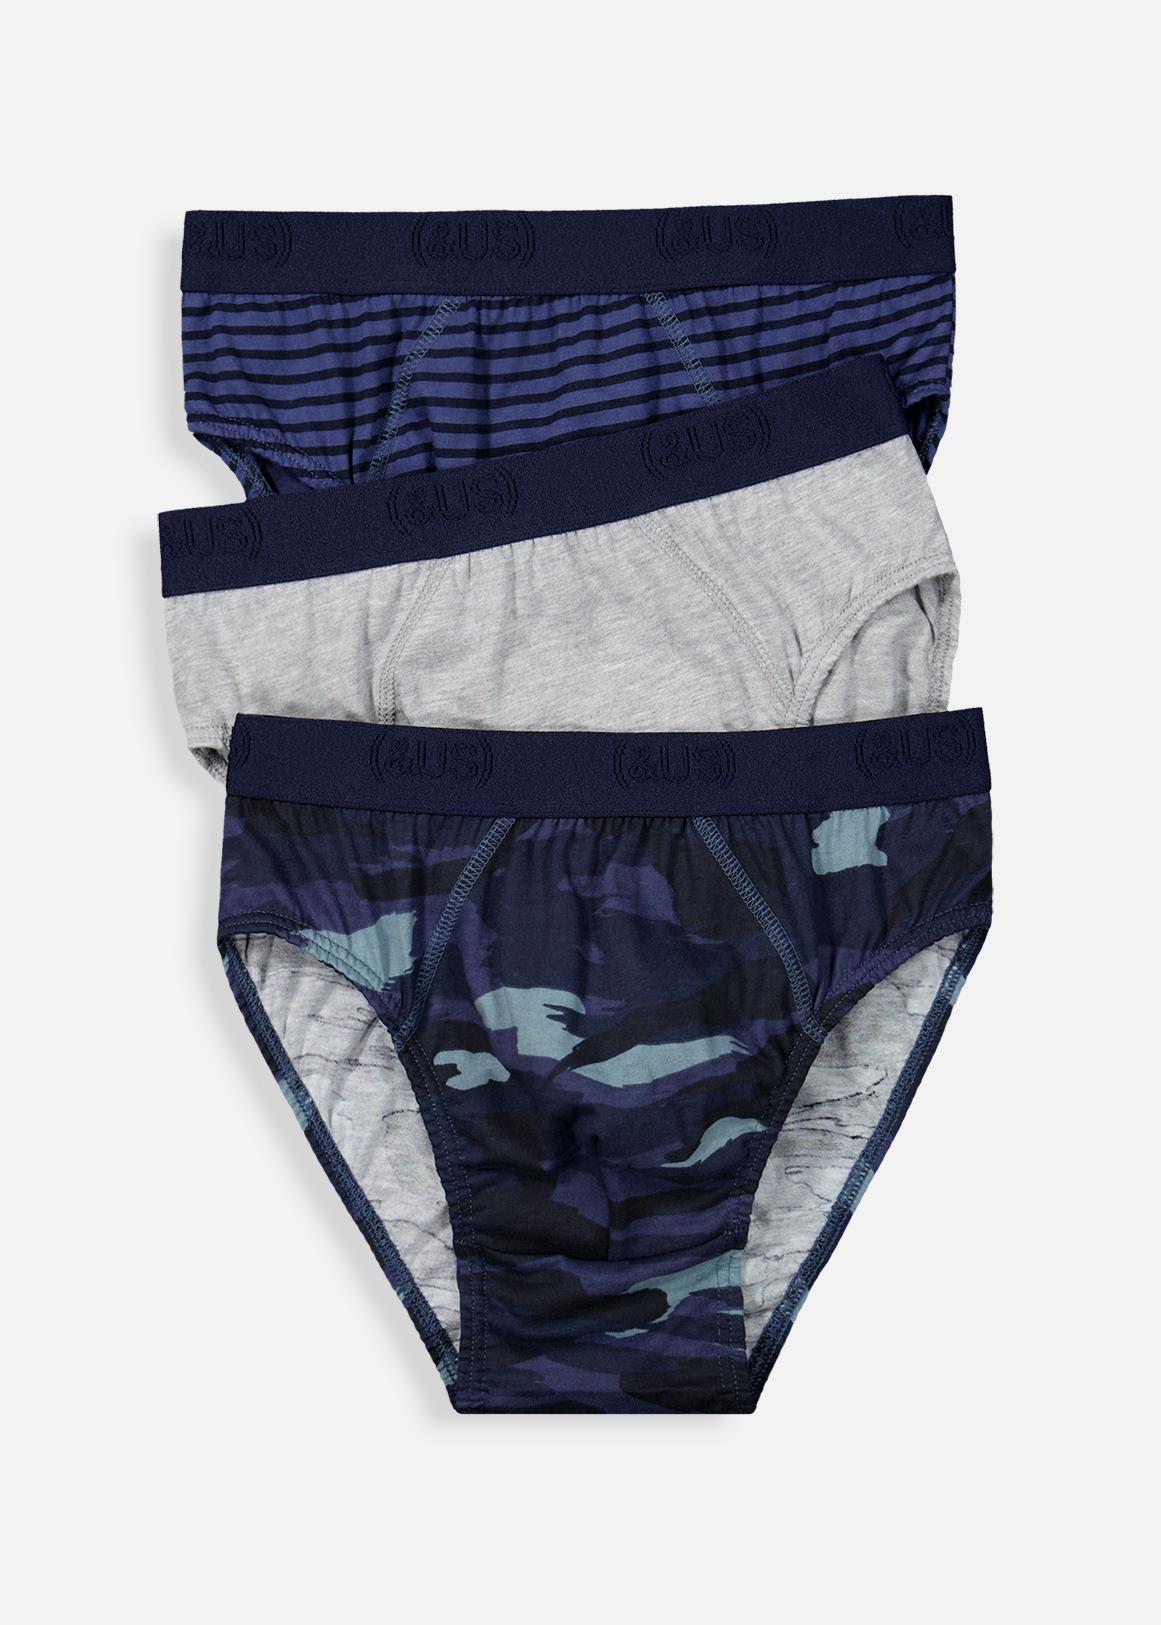 Pack Of 3 Printed Cotton Briefs In Assorted Colors-17000, 17000